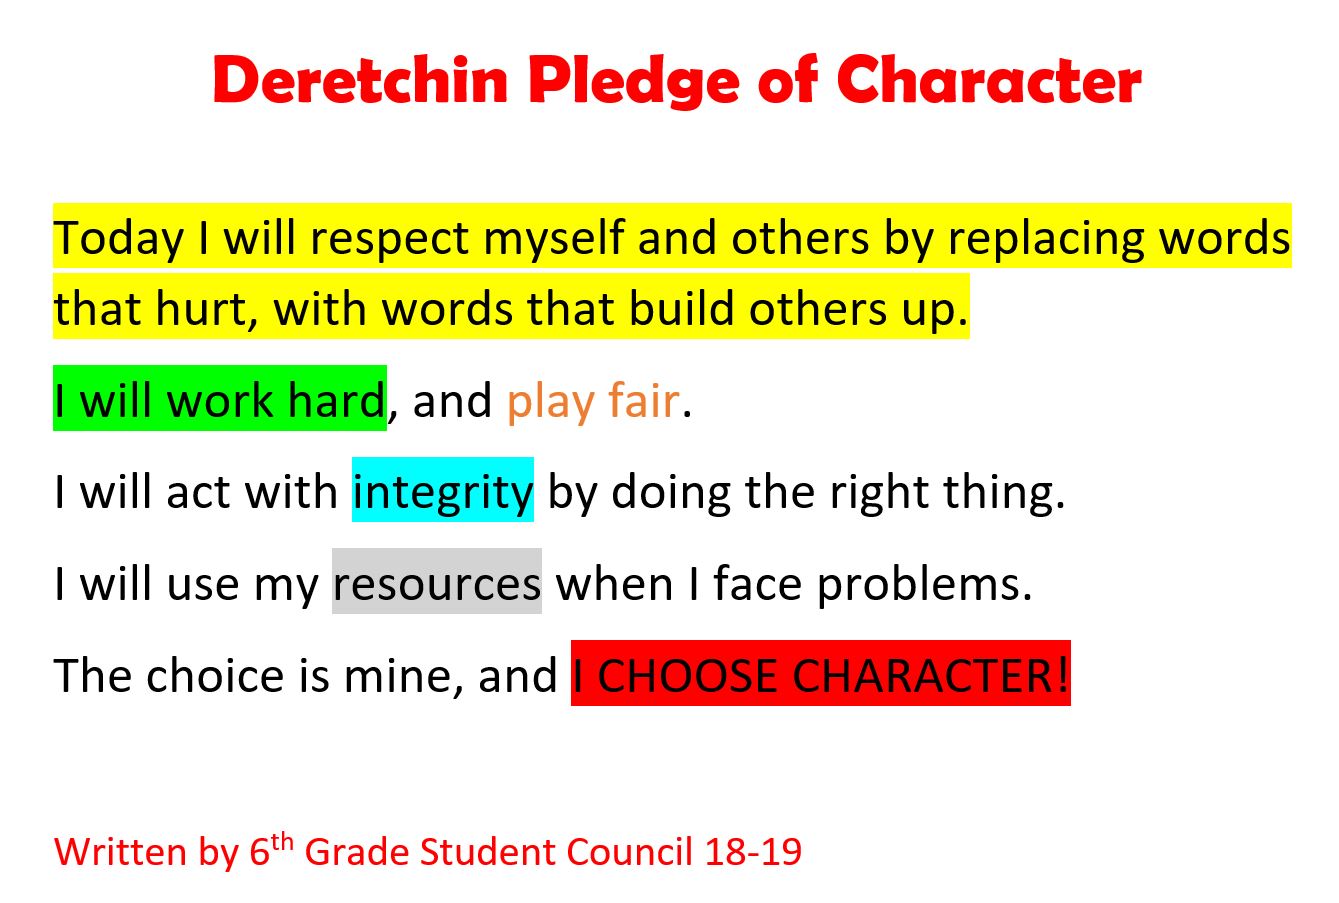 Deretchin Pledge of Character